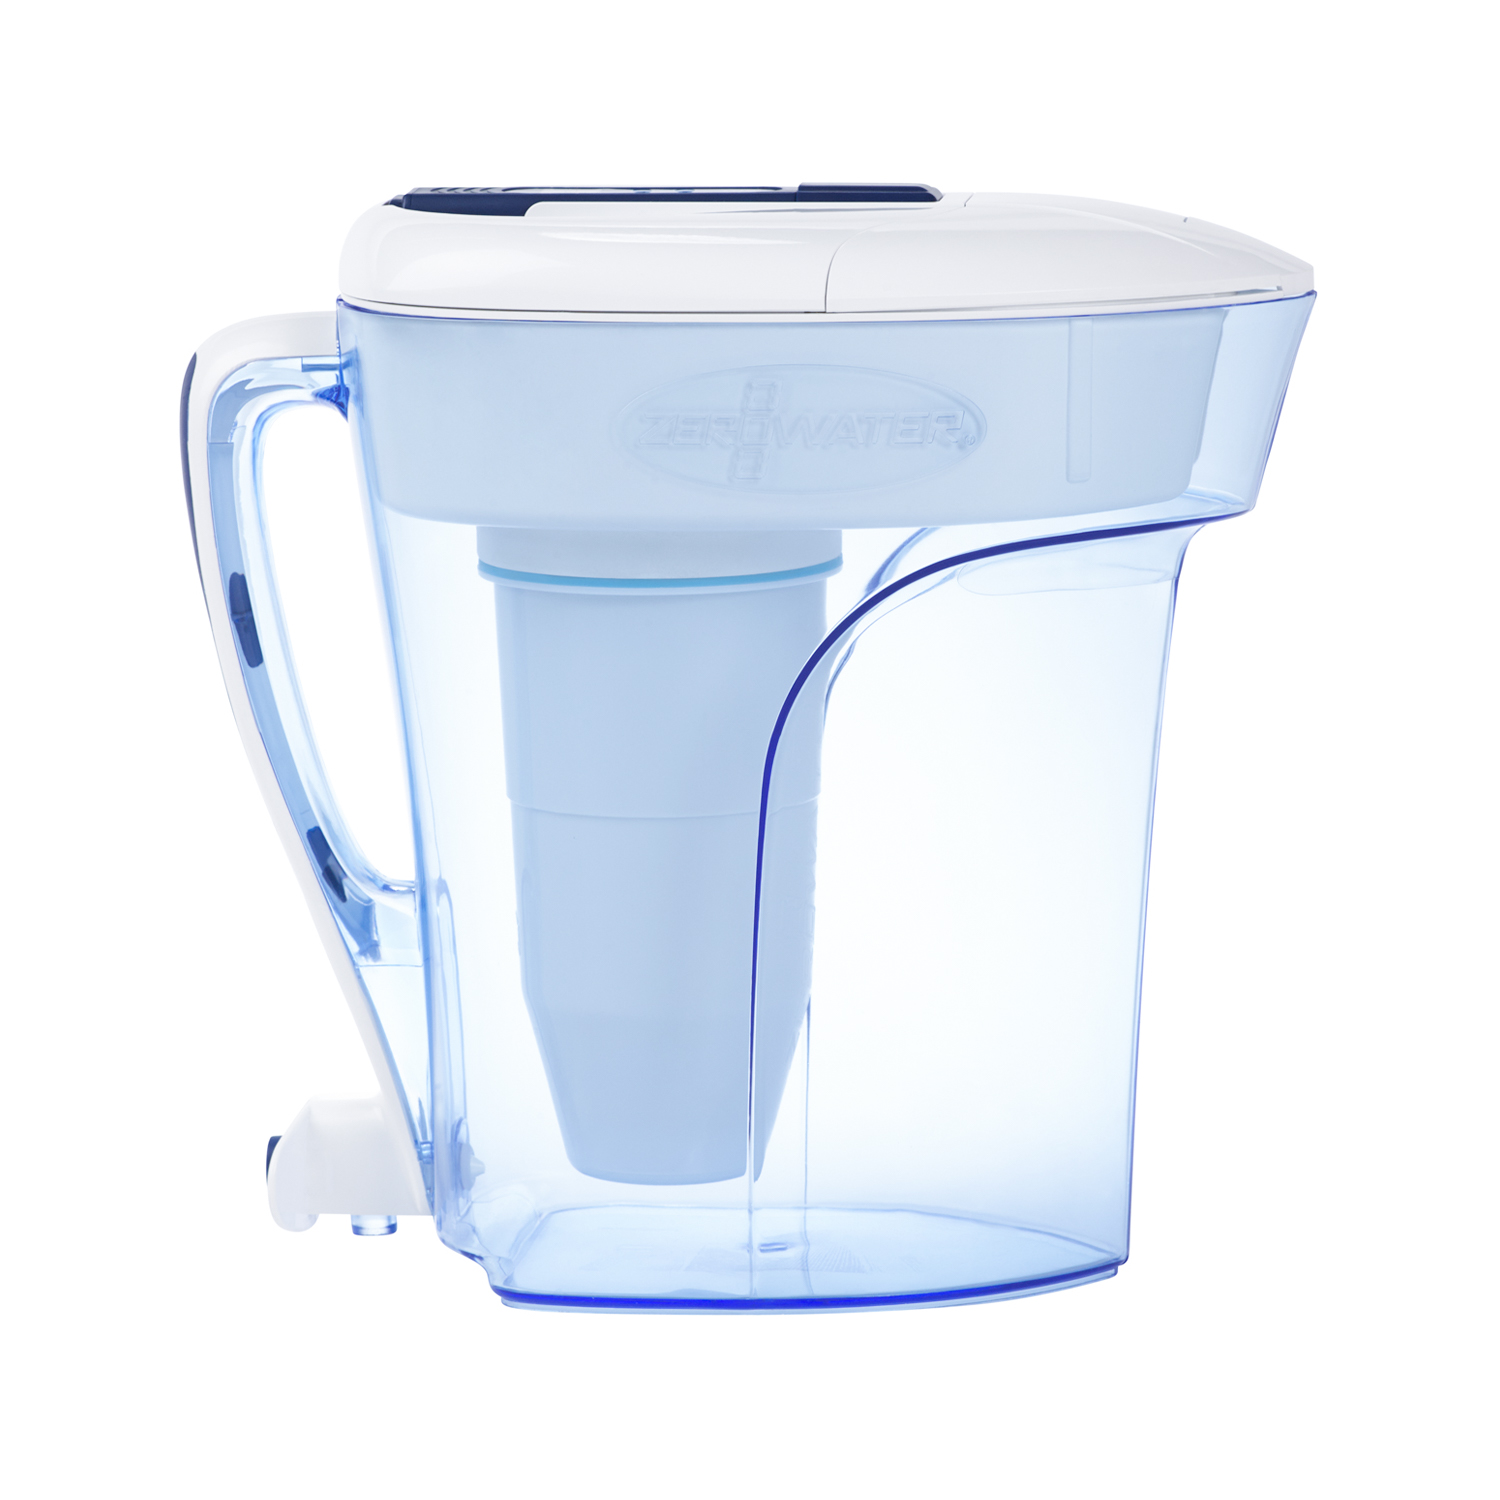 12 cup ready pour pitcher side view with handle spiqot